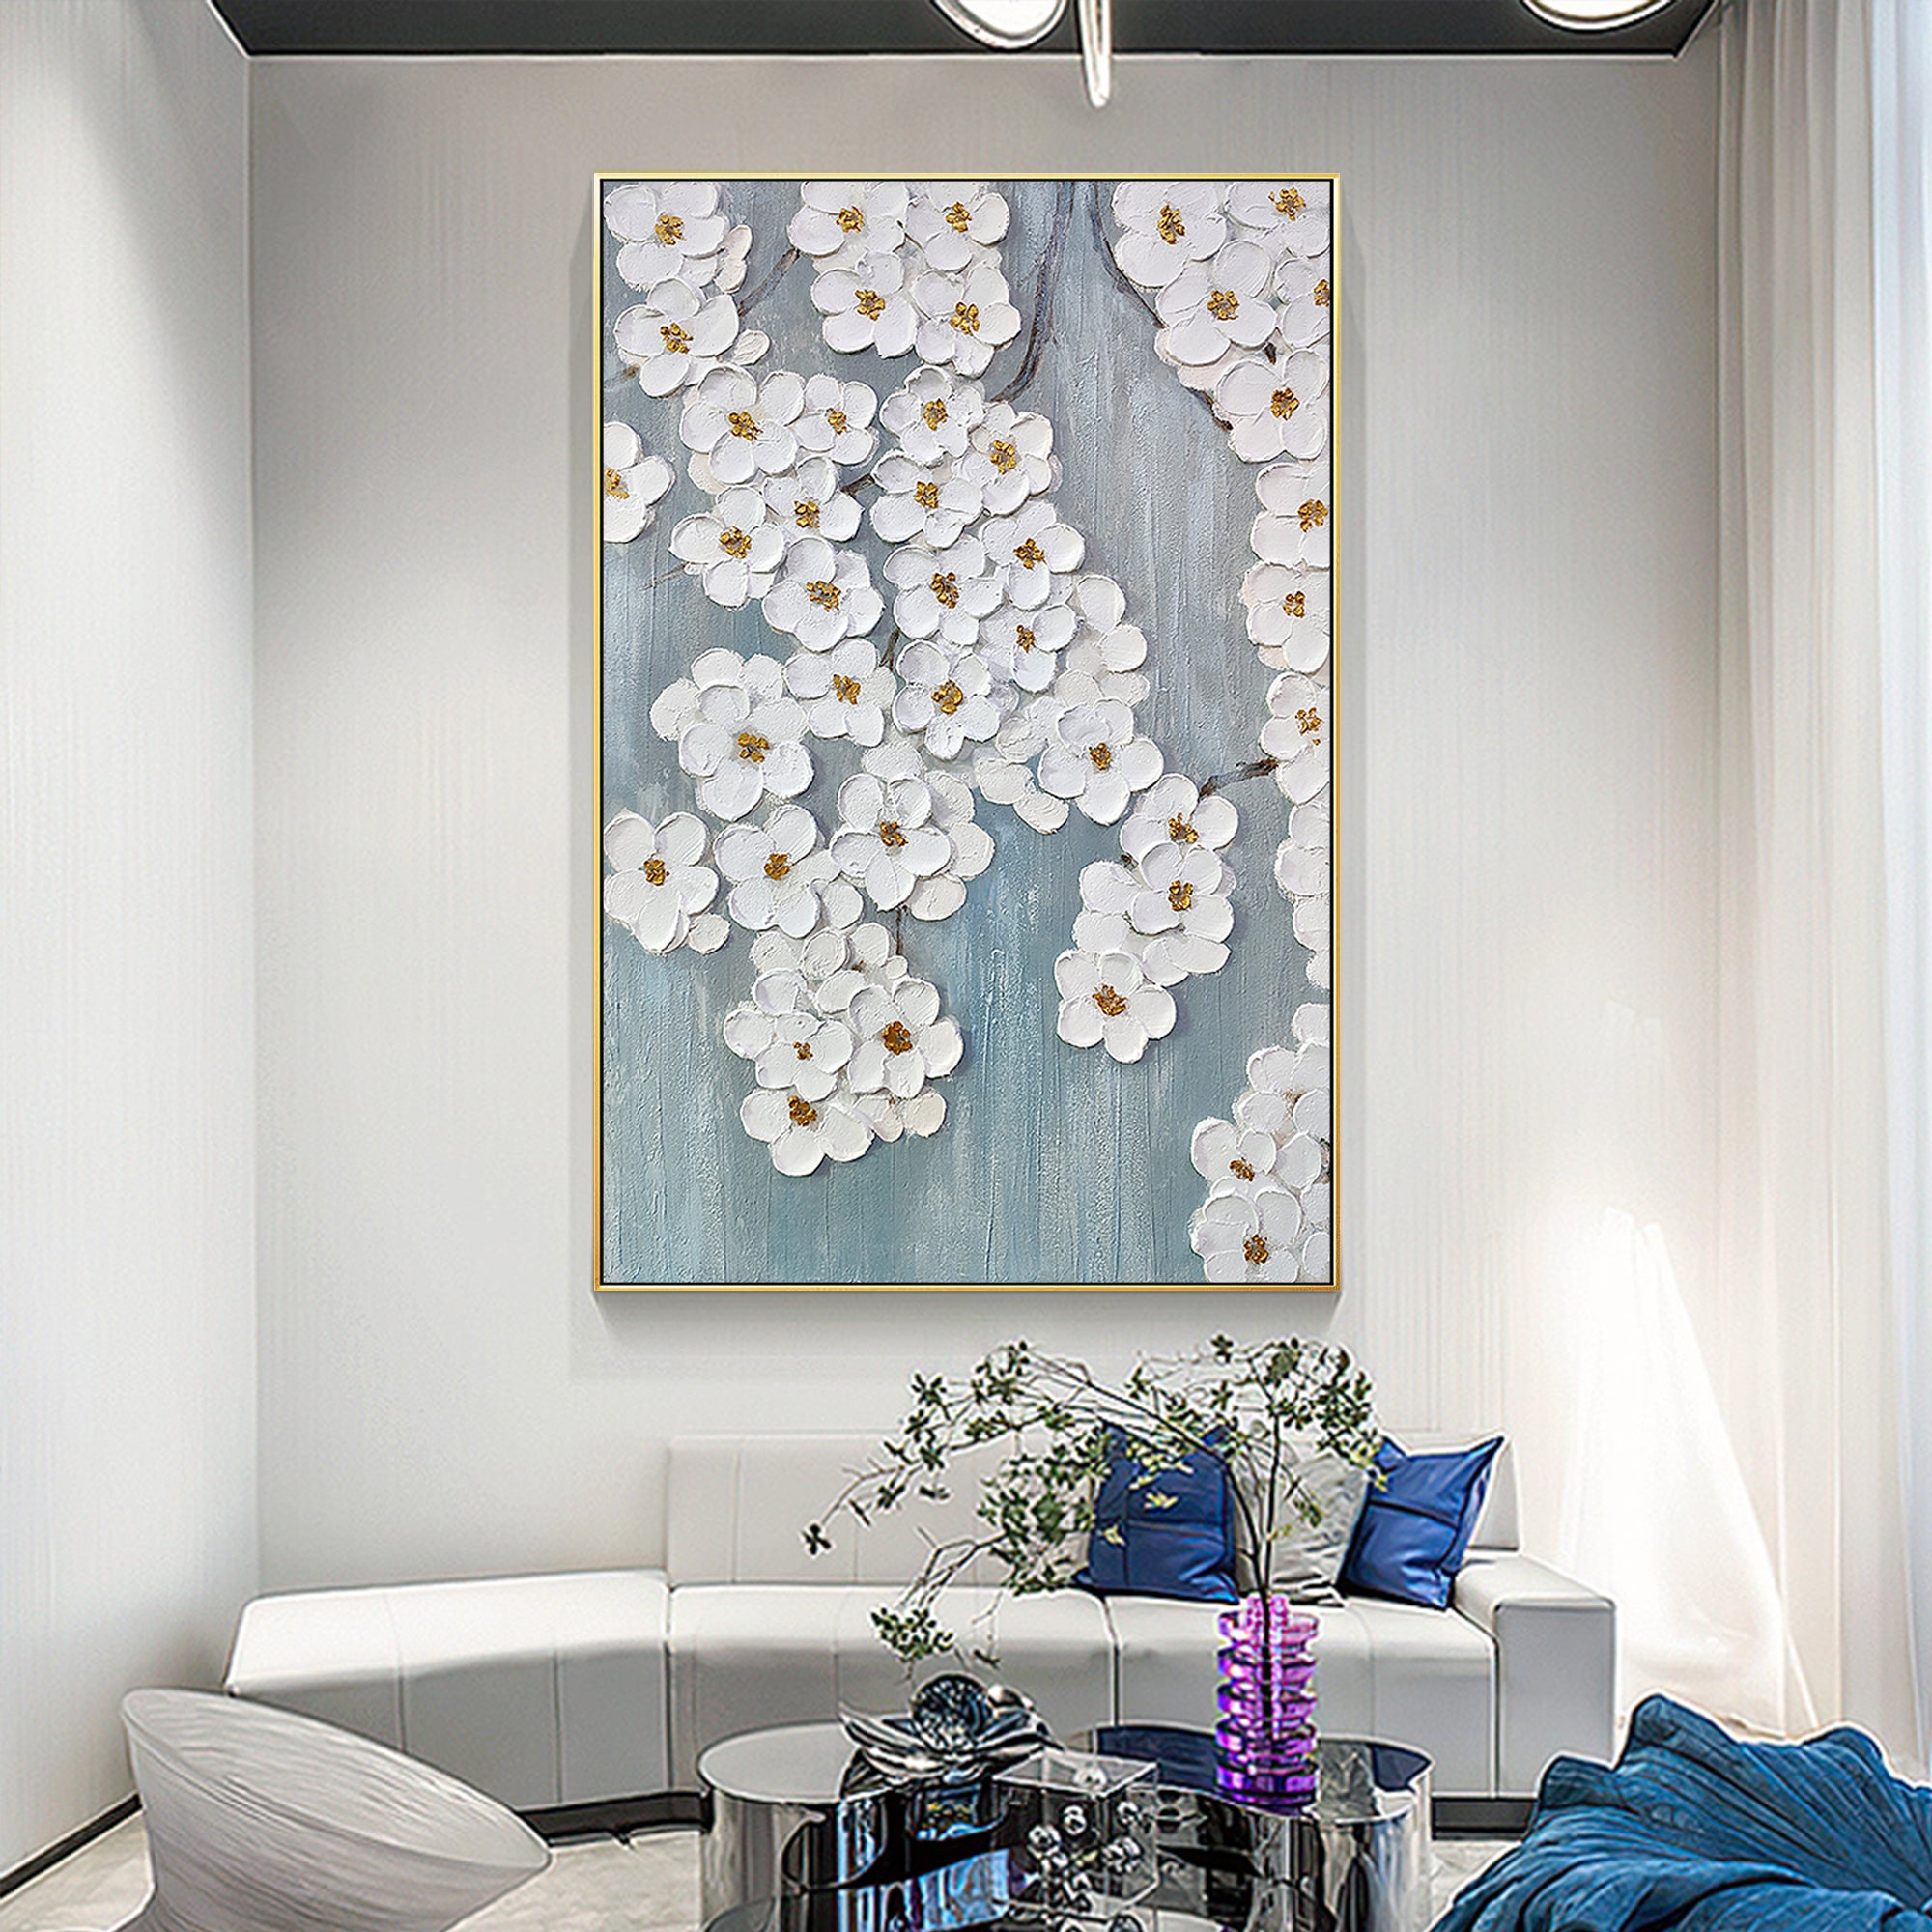 3D abstract flower wall decor painting